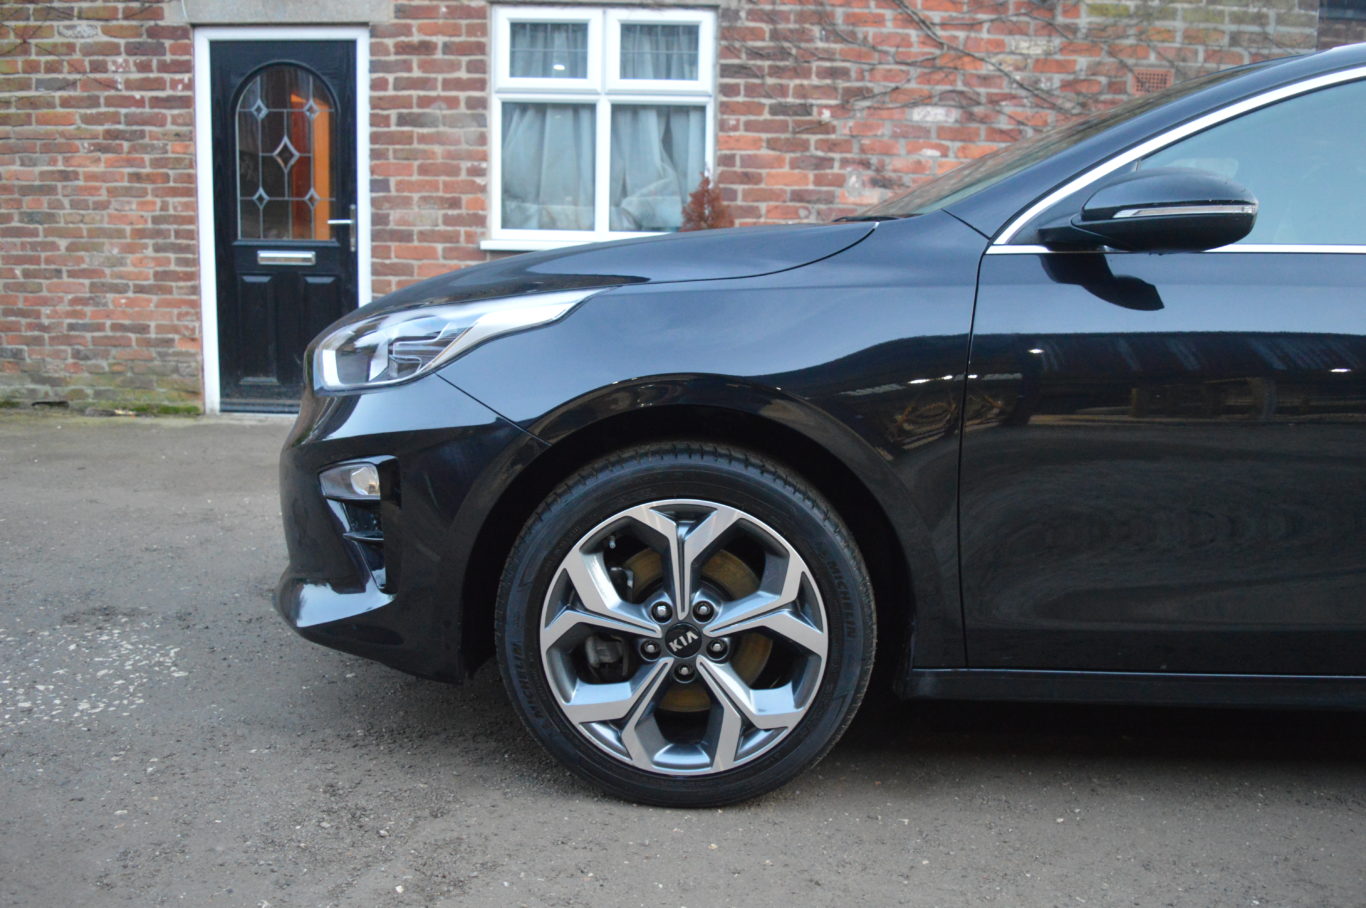 The Kia's large alloy wheels don't dent ride quality too much